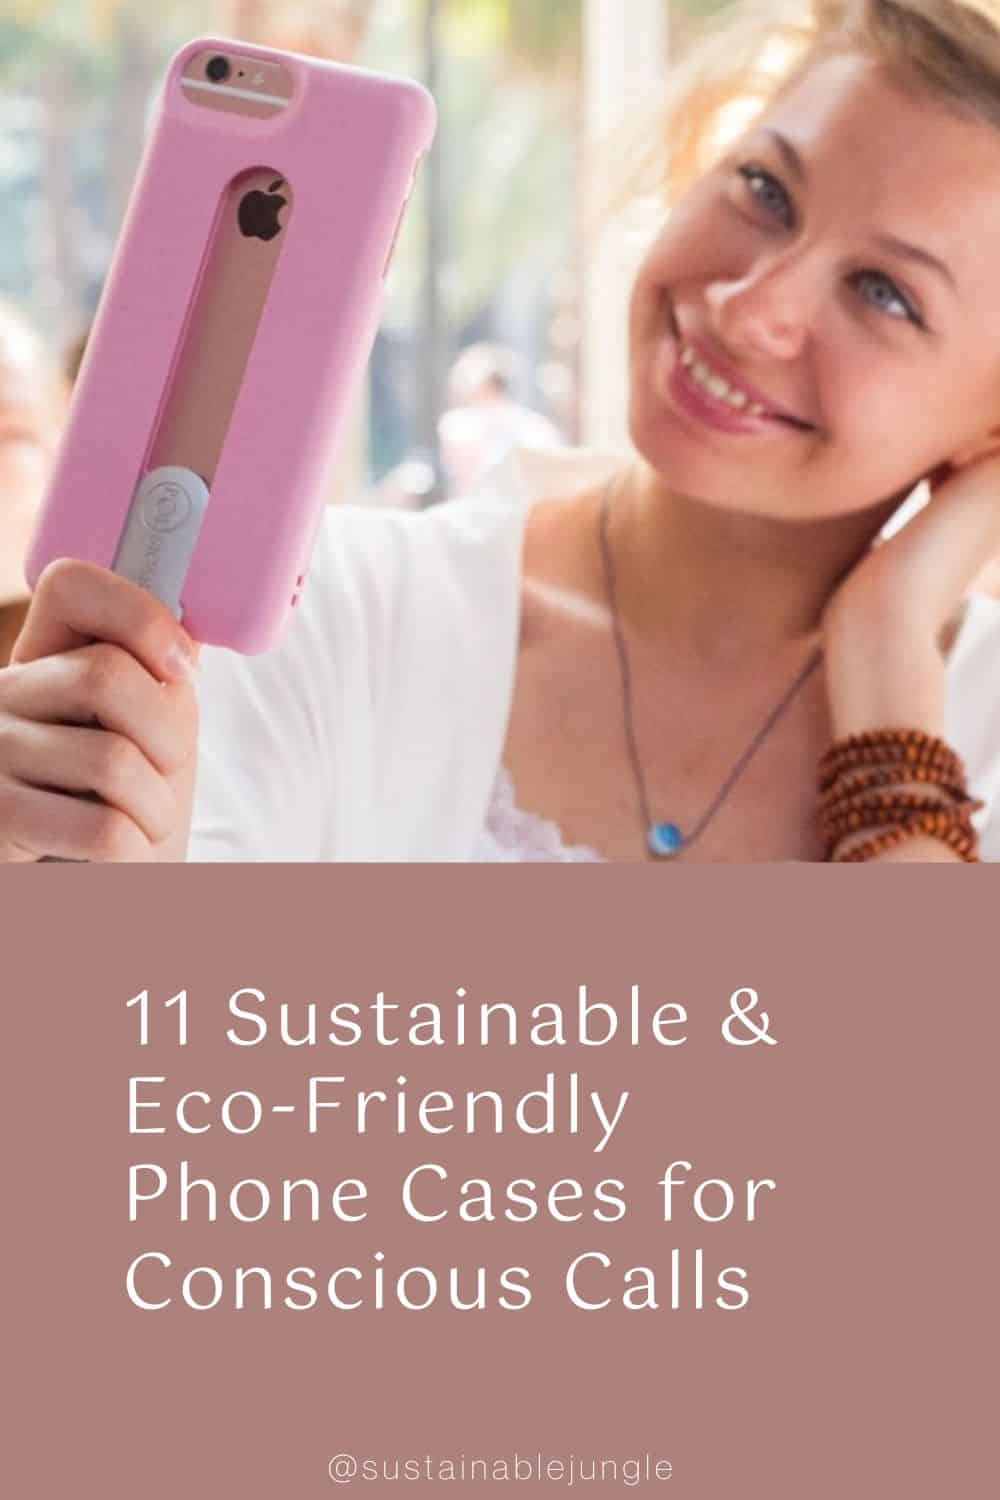 11 Sustainable & Eco-Friendly Phone Cases for Conscious Calls Image by Popsicase #ecofriendlyphonecases #sustainablephonecases #ecofriendlyiphonecases #ecofriendlycellphonecases #bestsustainablephonecases #sustainablephonecasebrands #sustainablejungle